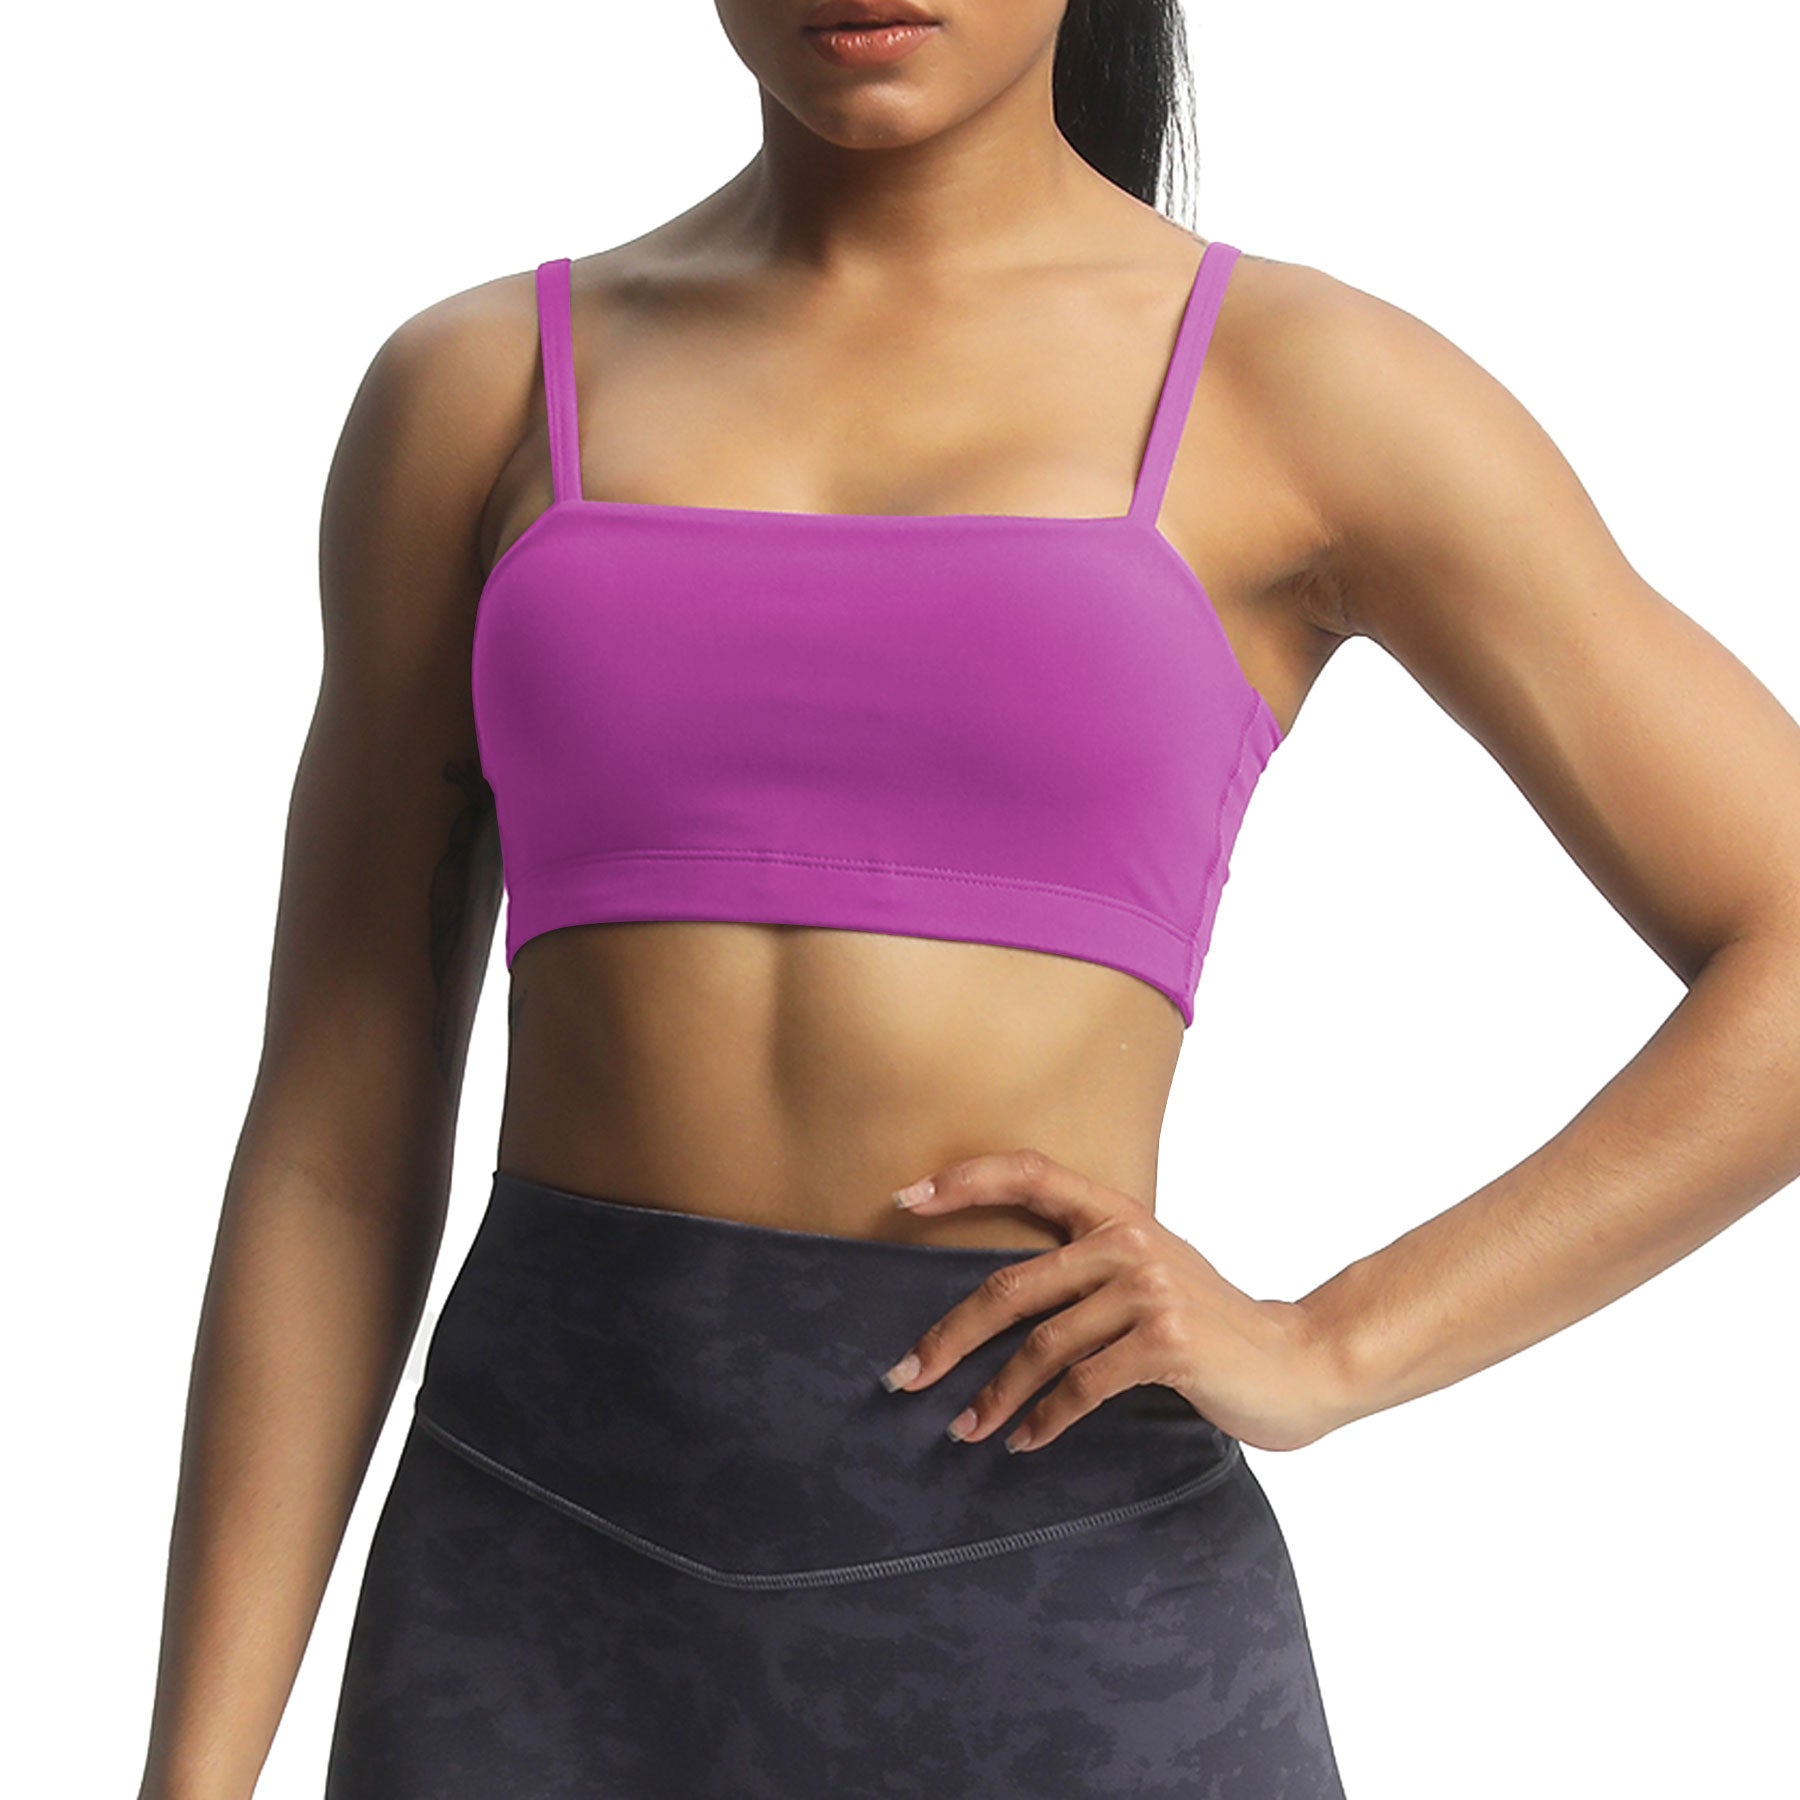 It is time for the next chapter 🤍 Activewear is from @aoxjox Sport bra -  backless padded sport bra Shorts - seamless tie-dye lifting